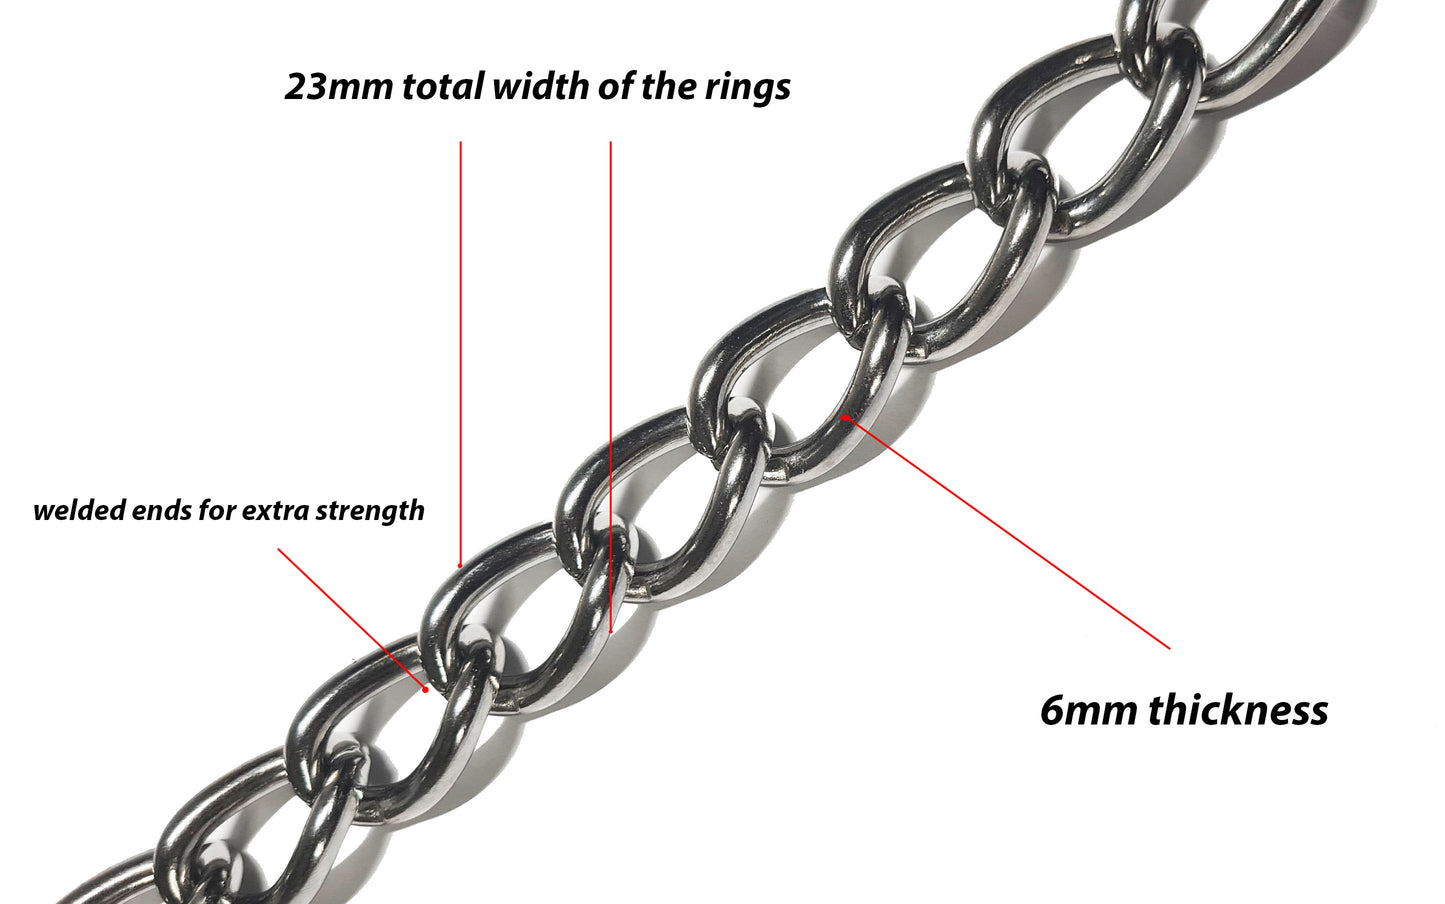 Heavy Duty Leash Chain Dog Lead for any Medium, Large and Extra Large Dog Breed